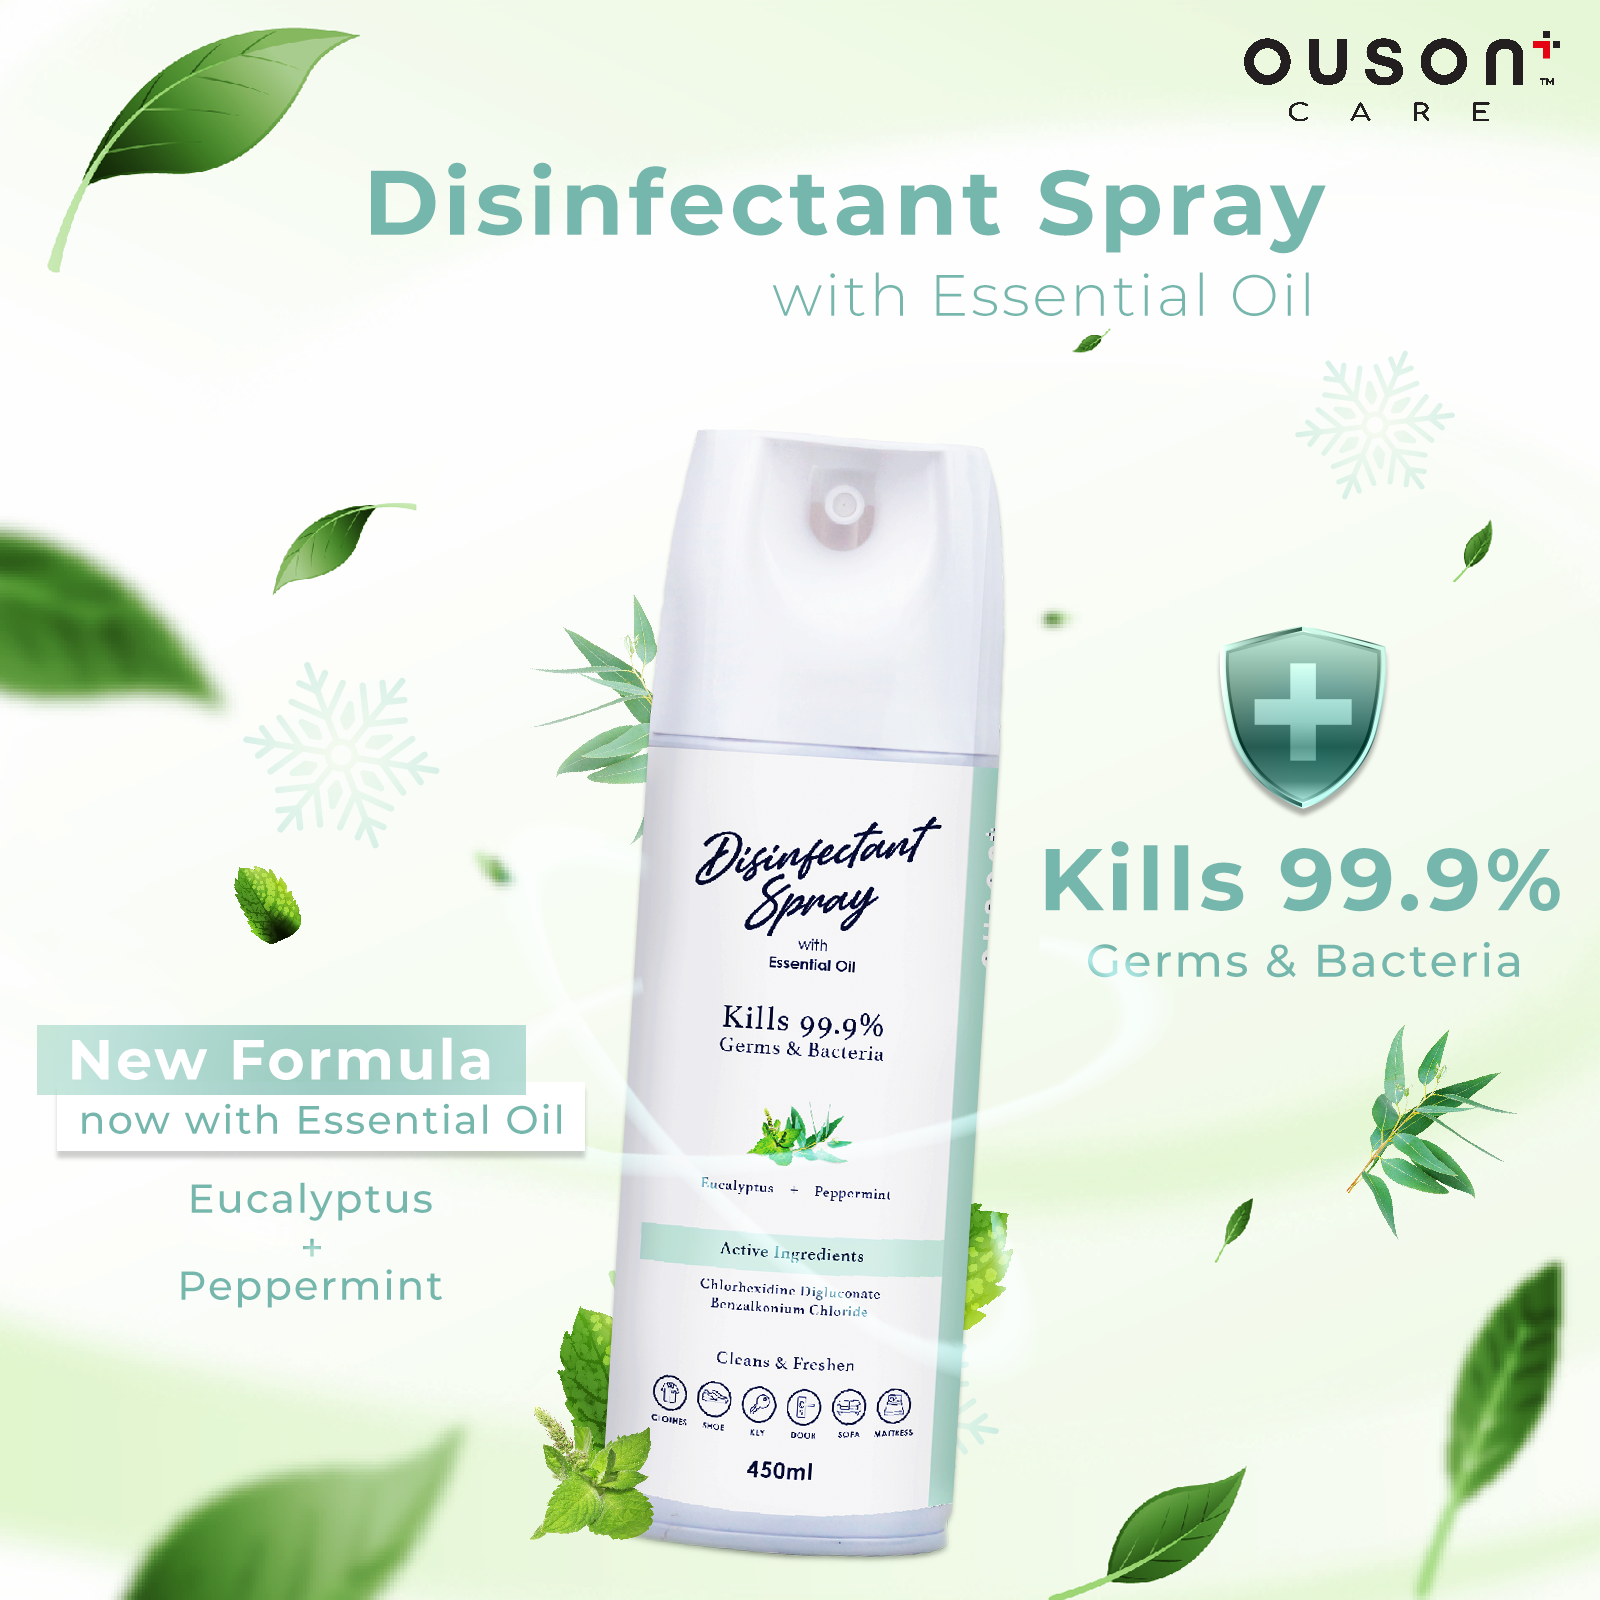 Ouson Care Disinfectant Spray with Fragrance 450ml & Disinfectant Spray with Essential Oil 450ml with Hand Sanitizer (Bundle)